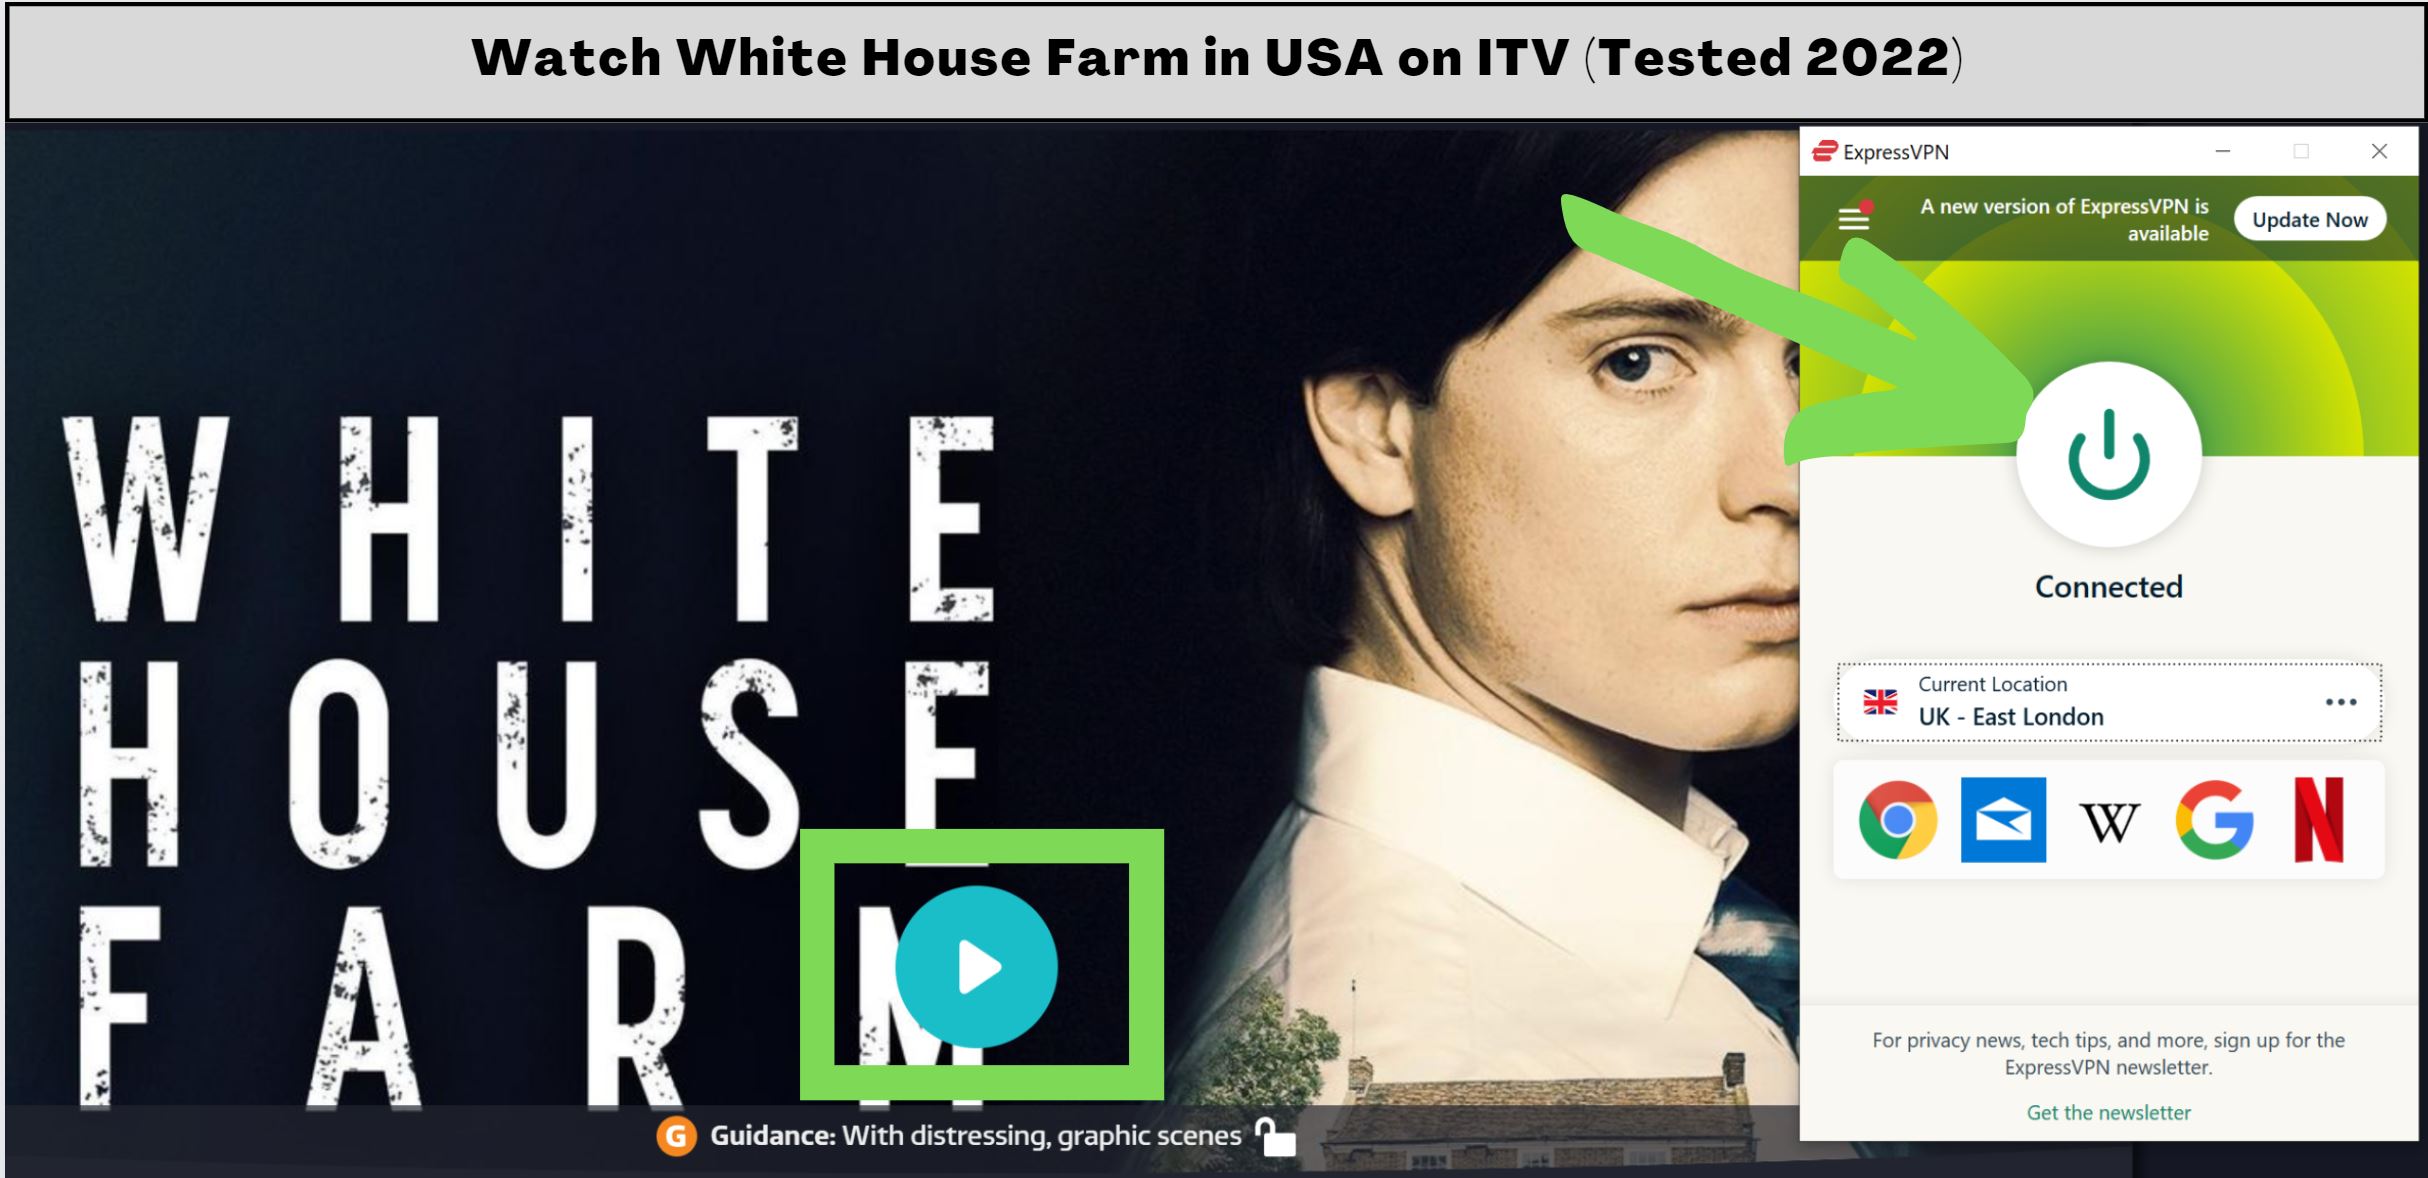 watch White House Farm on ITV in USA